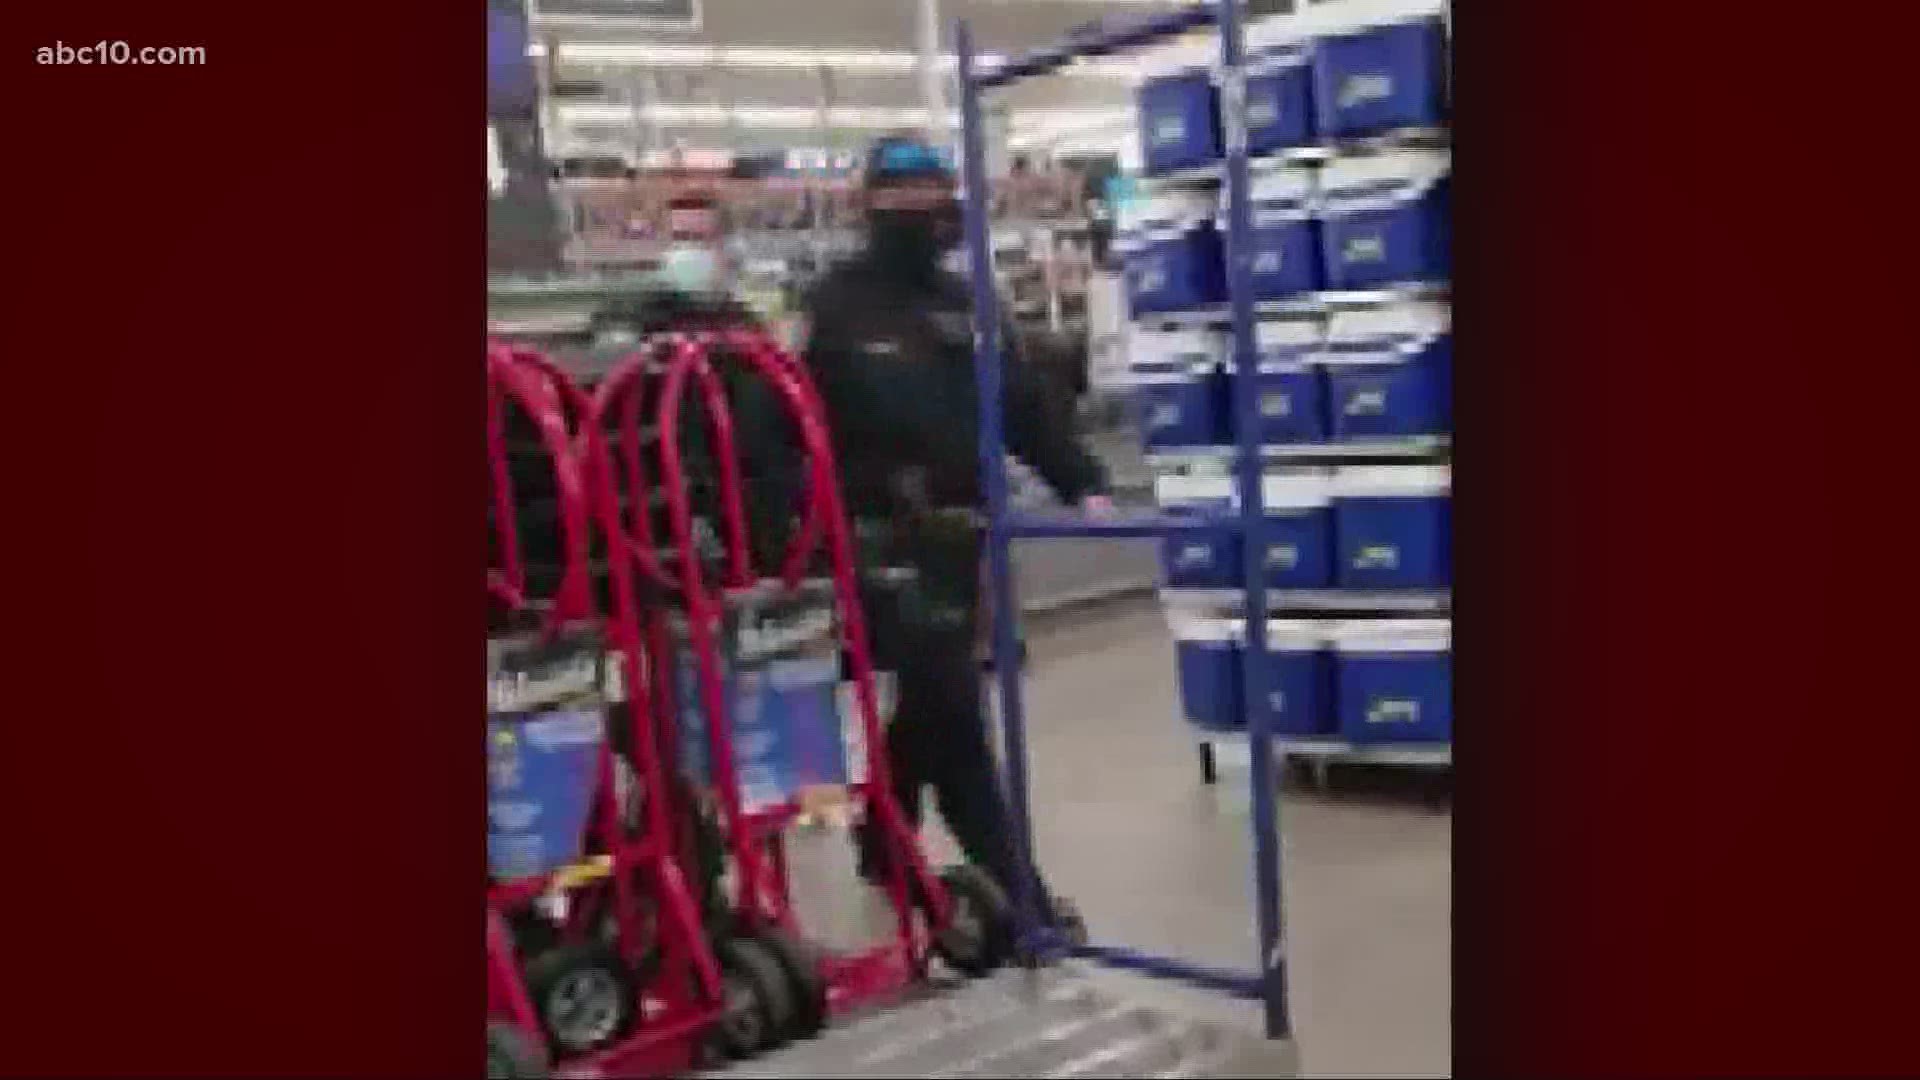 A Turlock Walmart called police for a trespassing after some people refused to wear masks in the store, said Turlock Police Chief Nino Amirfar.